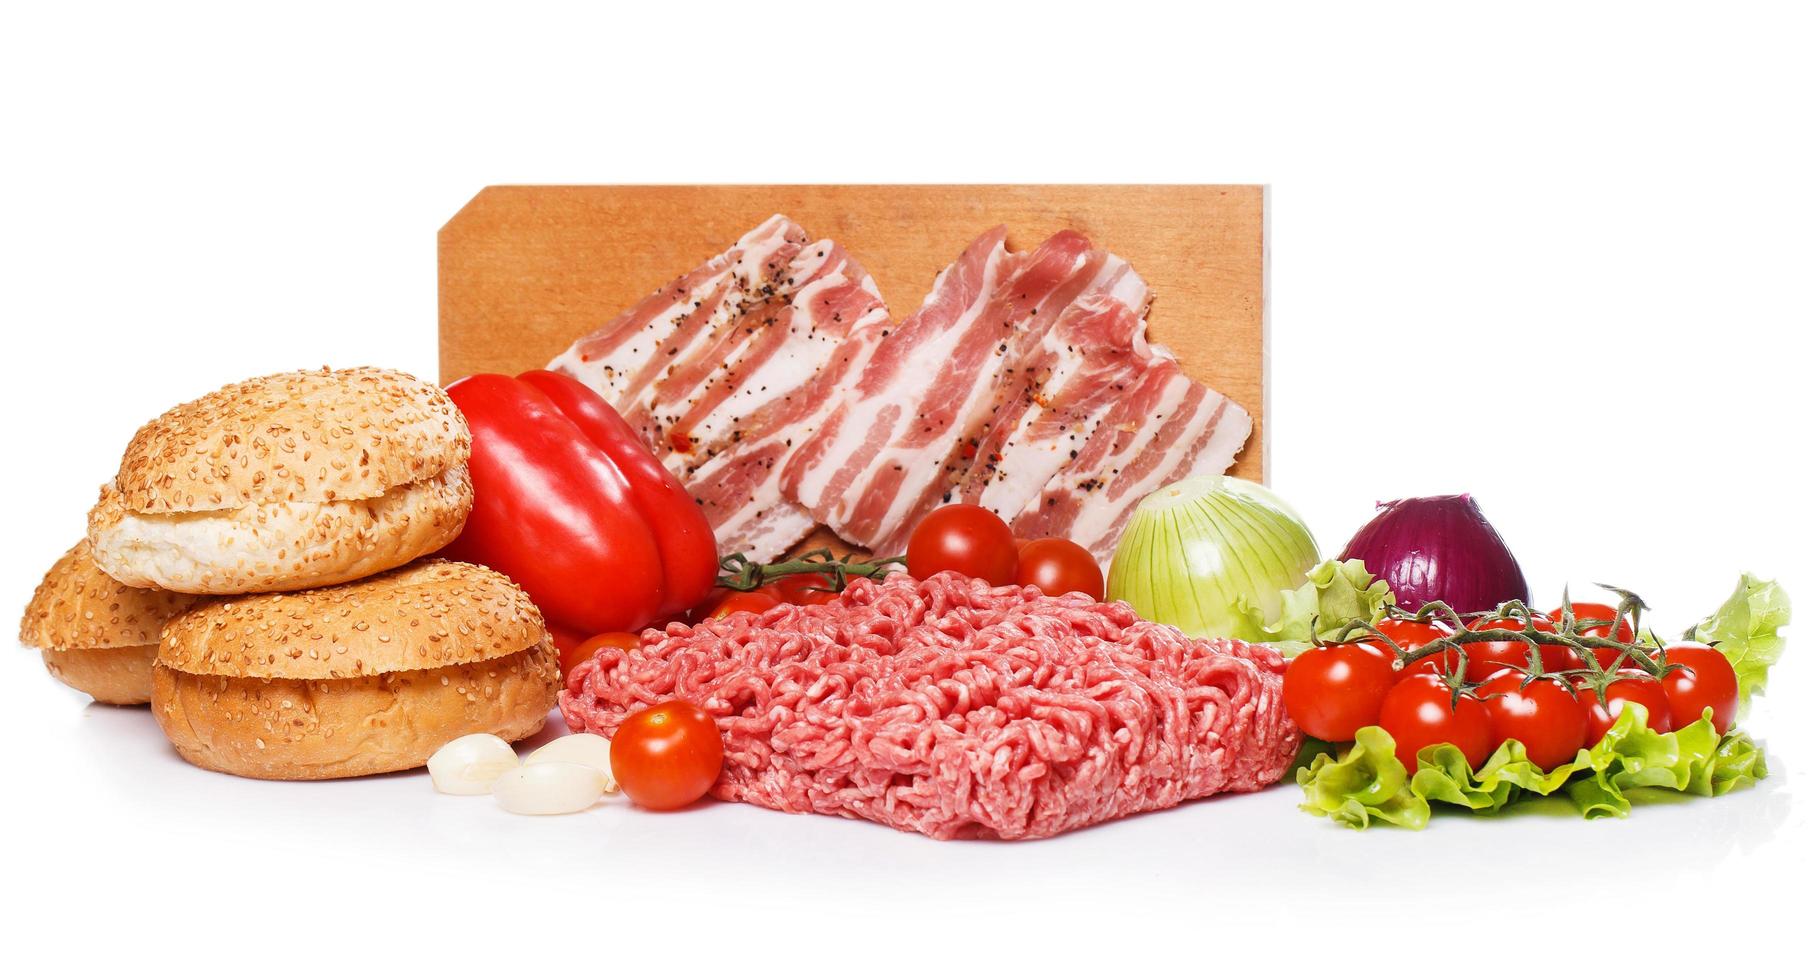 Ingredients for burger photo